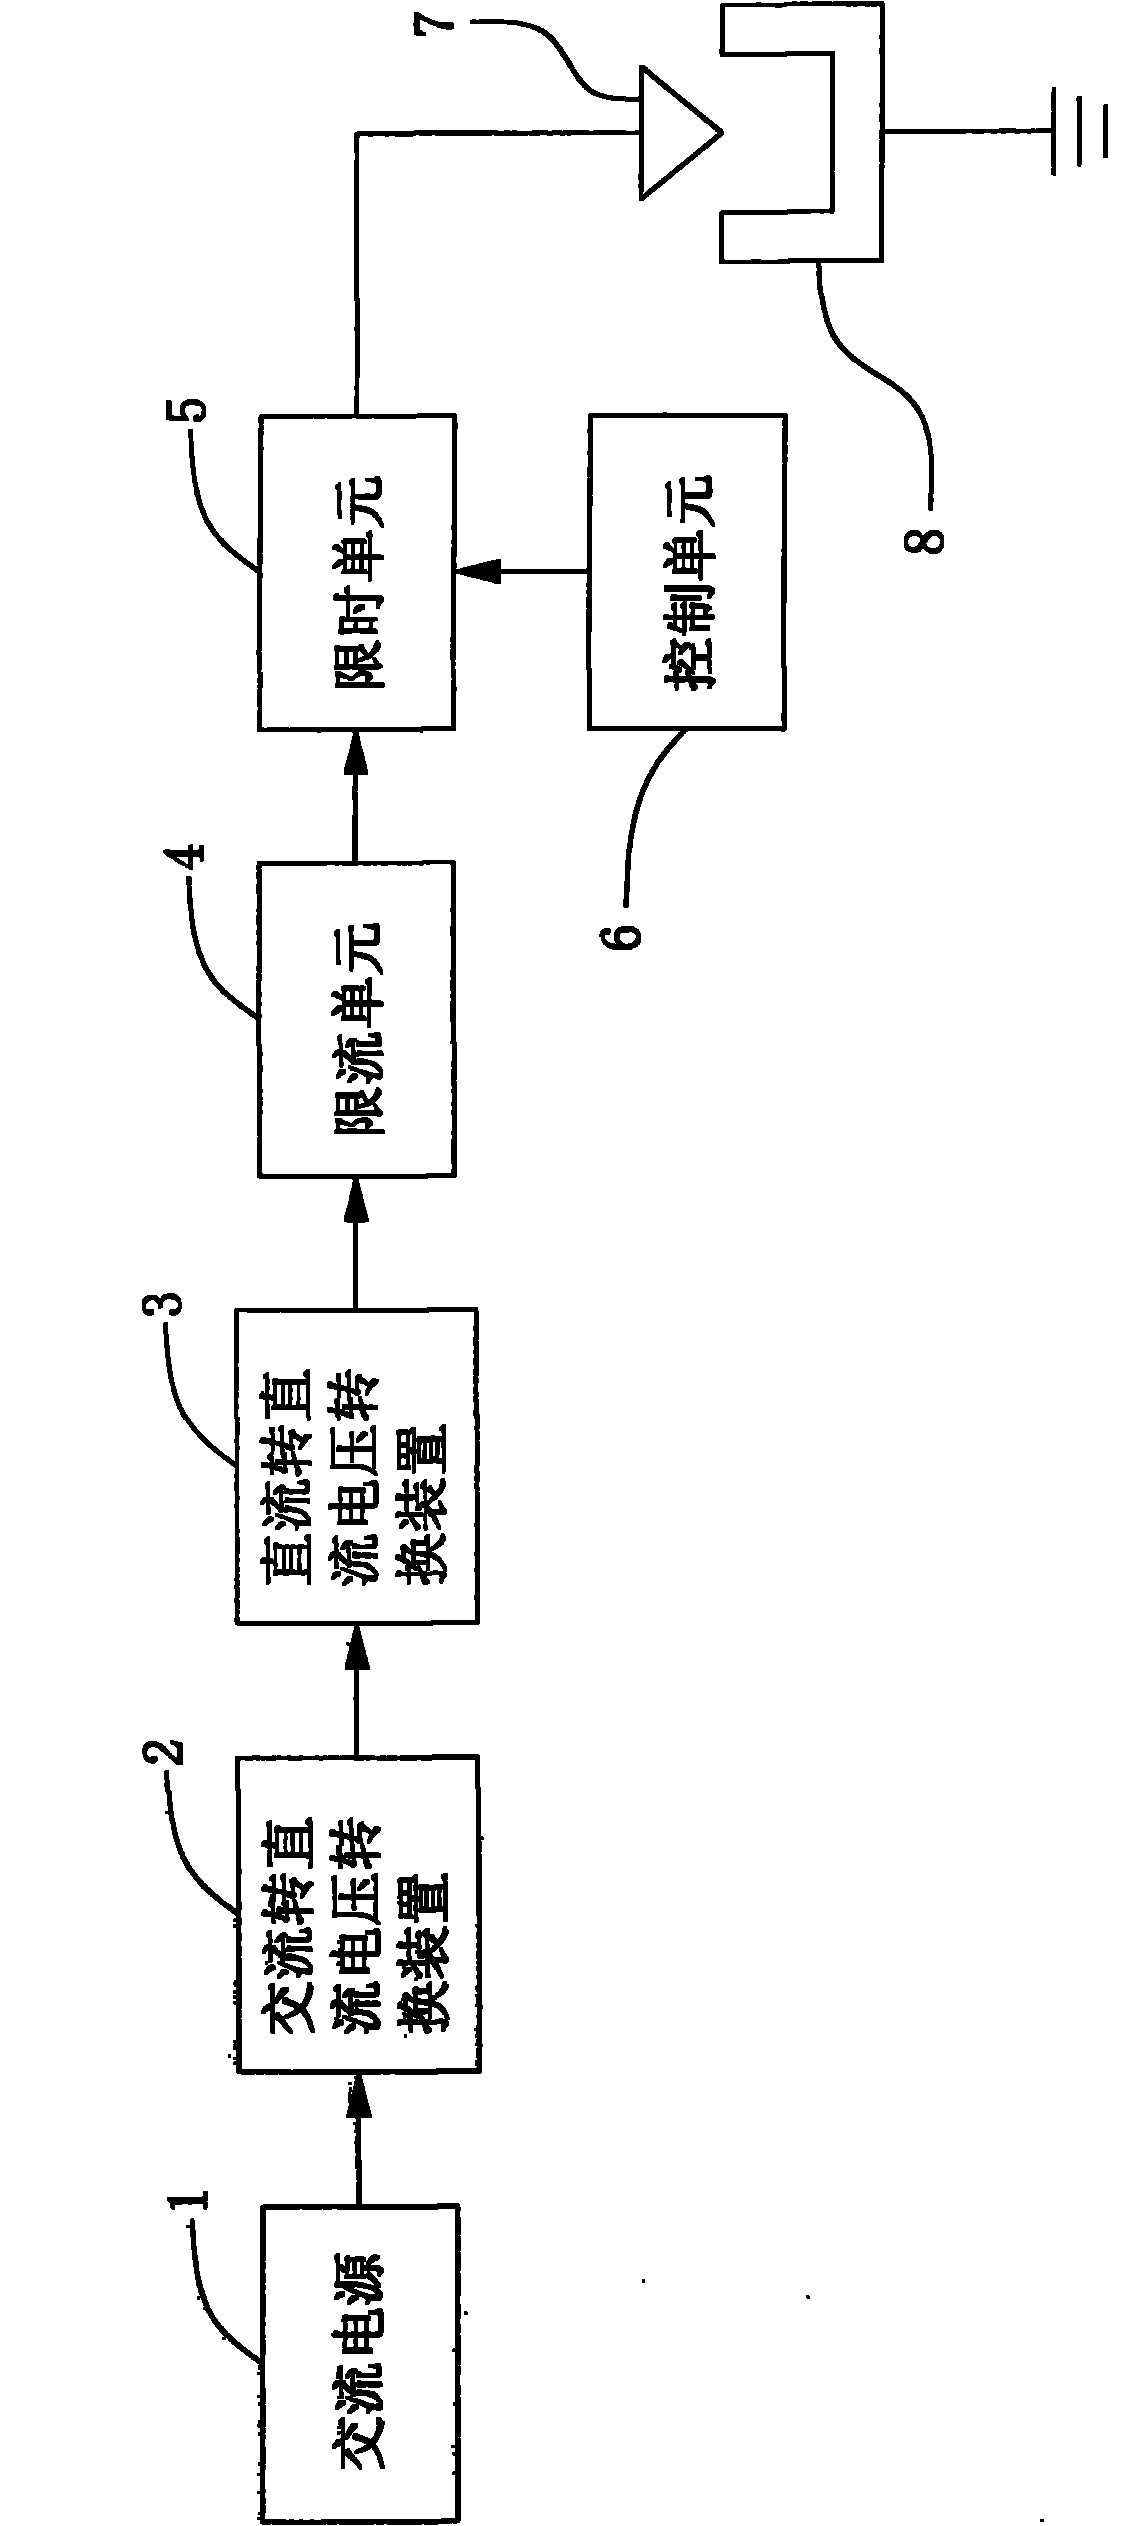 Energy-saving discharge power supply of electrical discharge machining machine